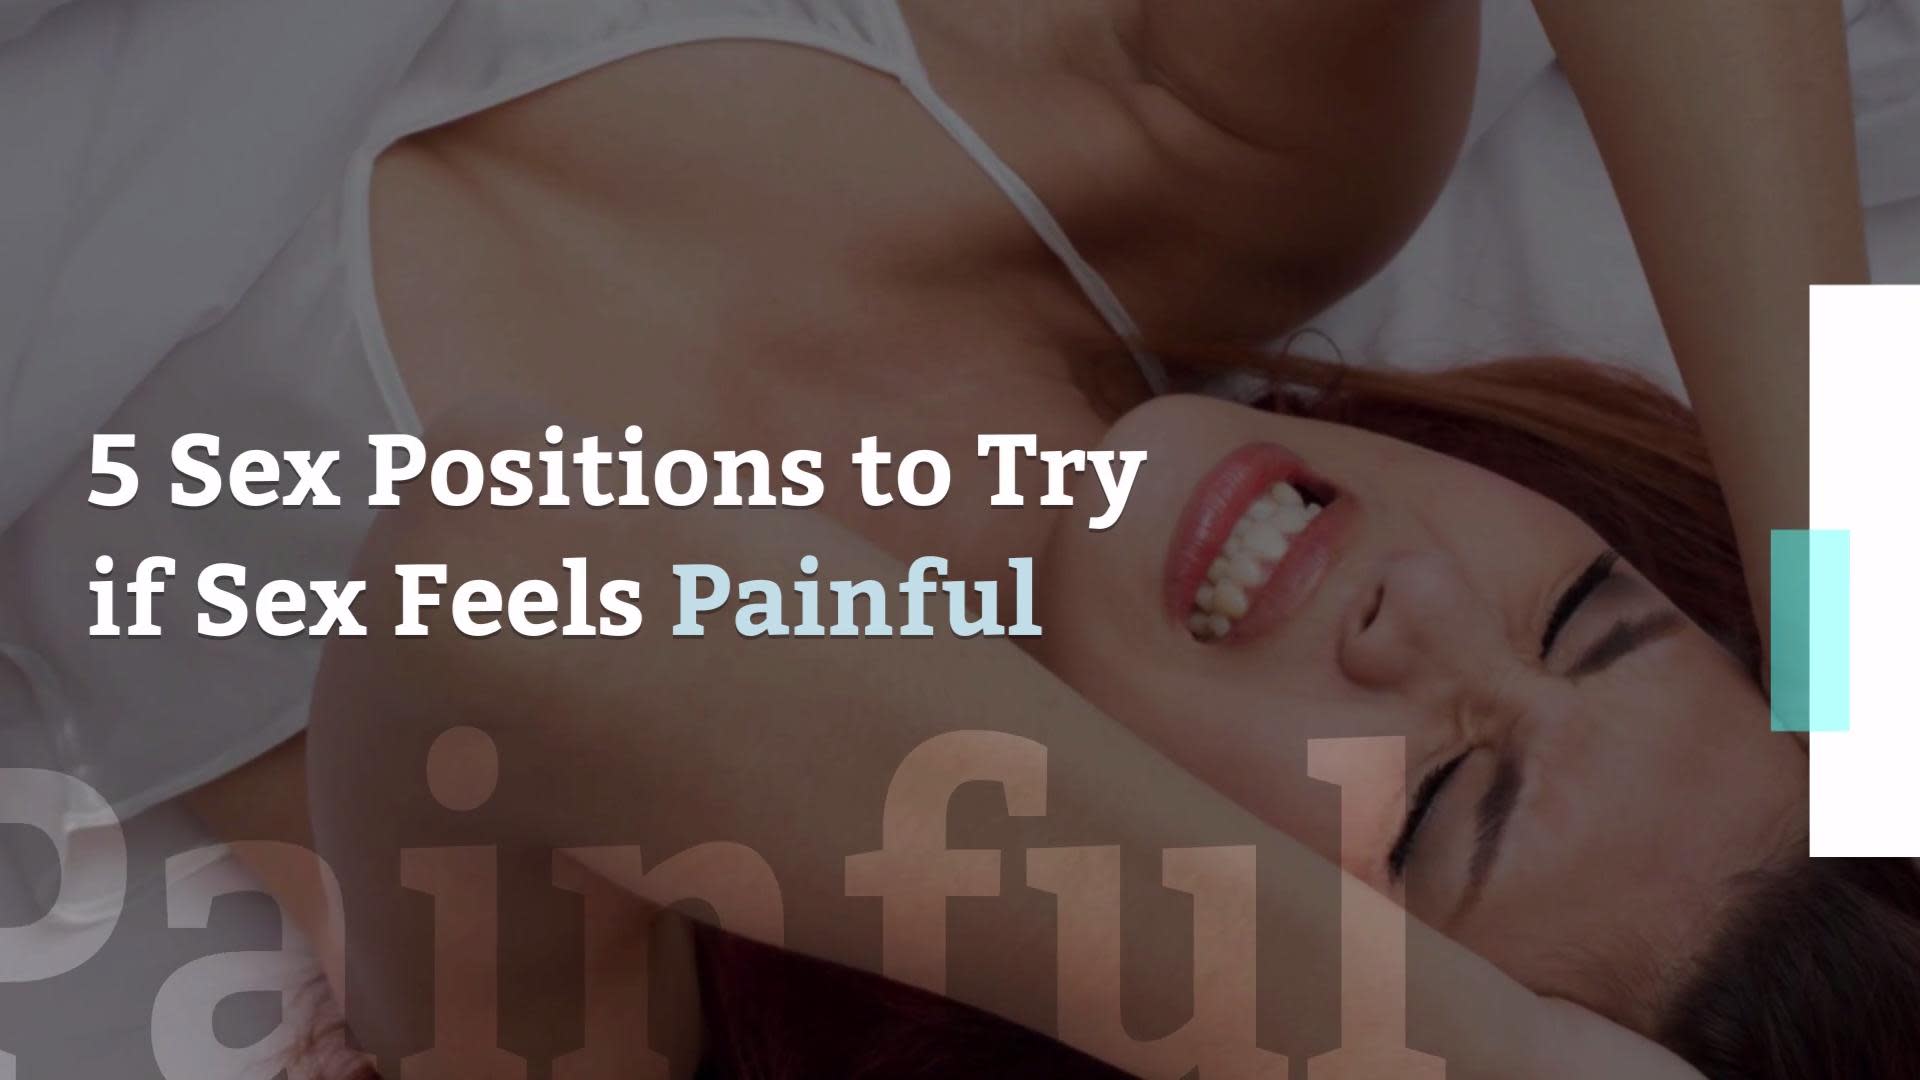 6 Sex Positions to Try if Sex Is Painful pic